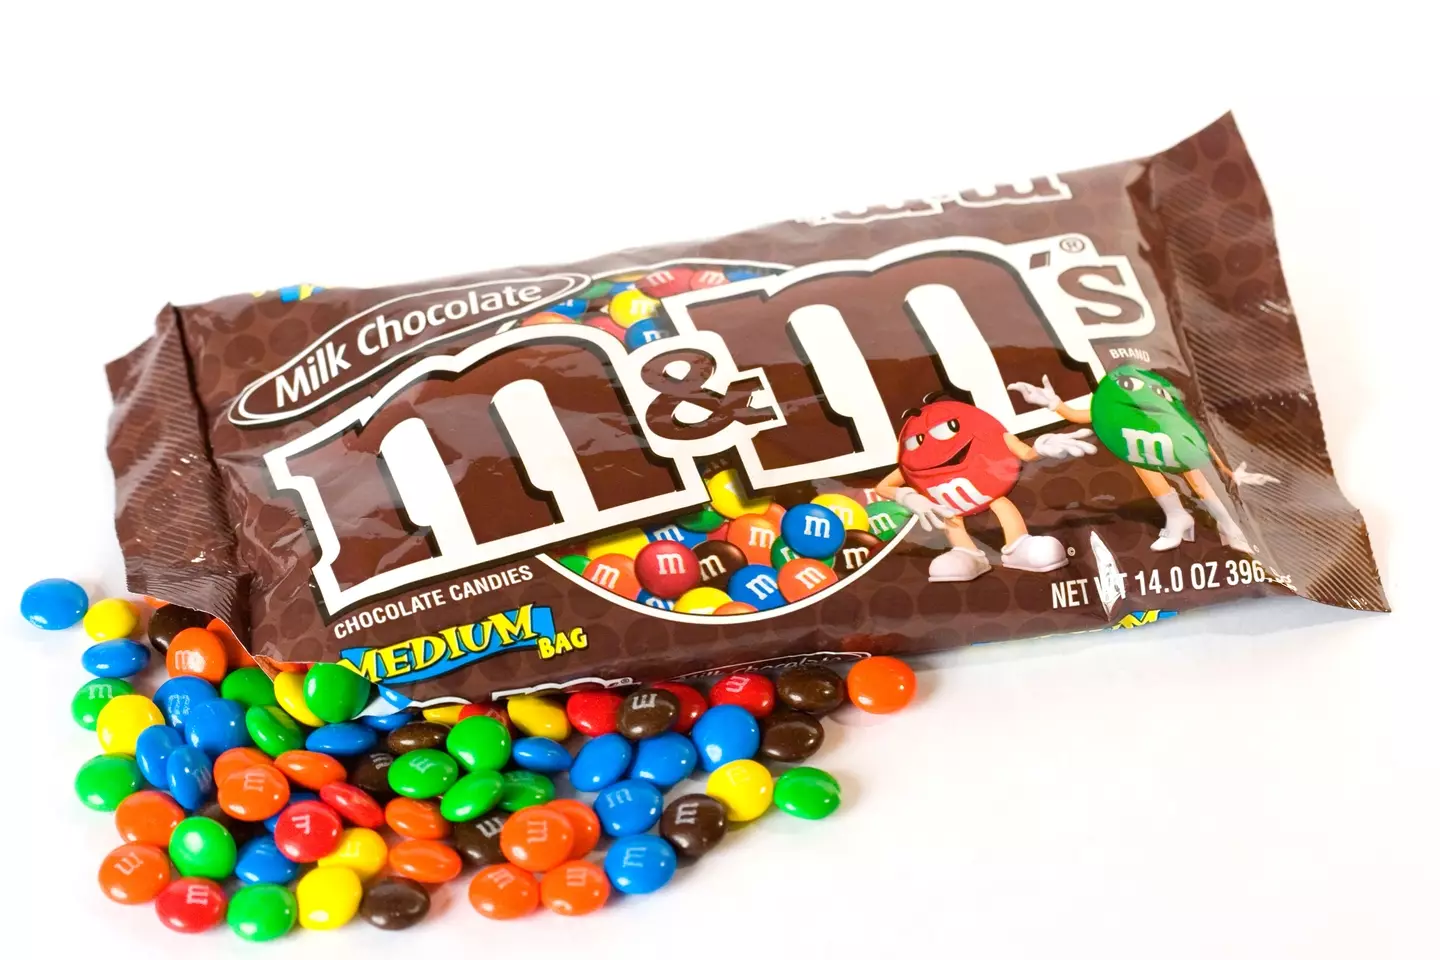 The son of the Mars company founder came up with the idea for M&M's because of the Spanish Civil War.